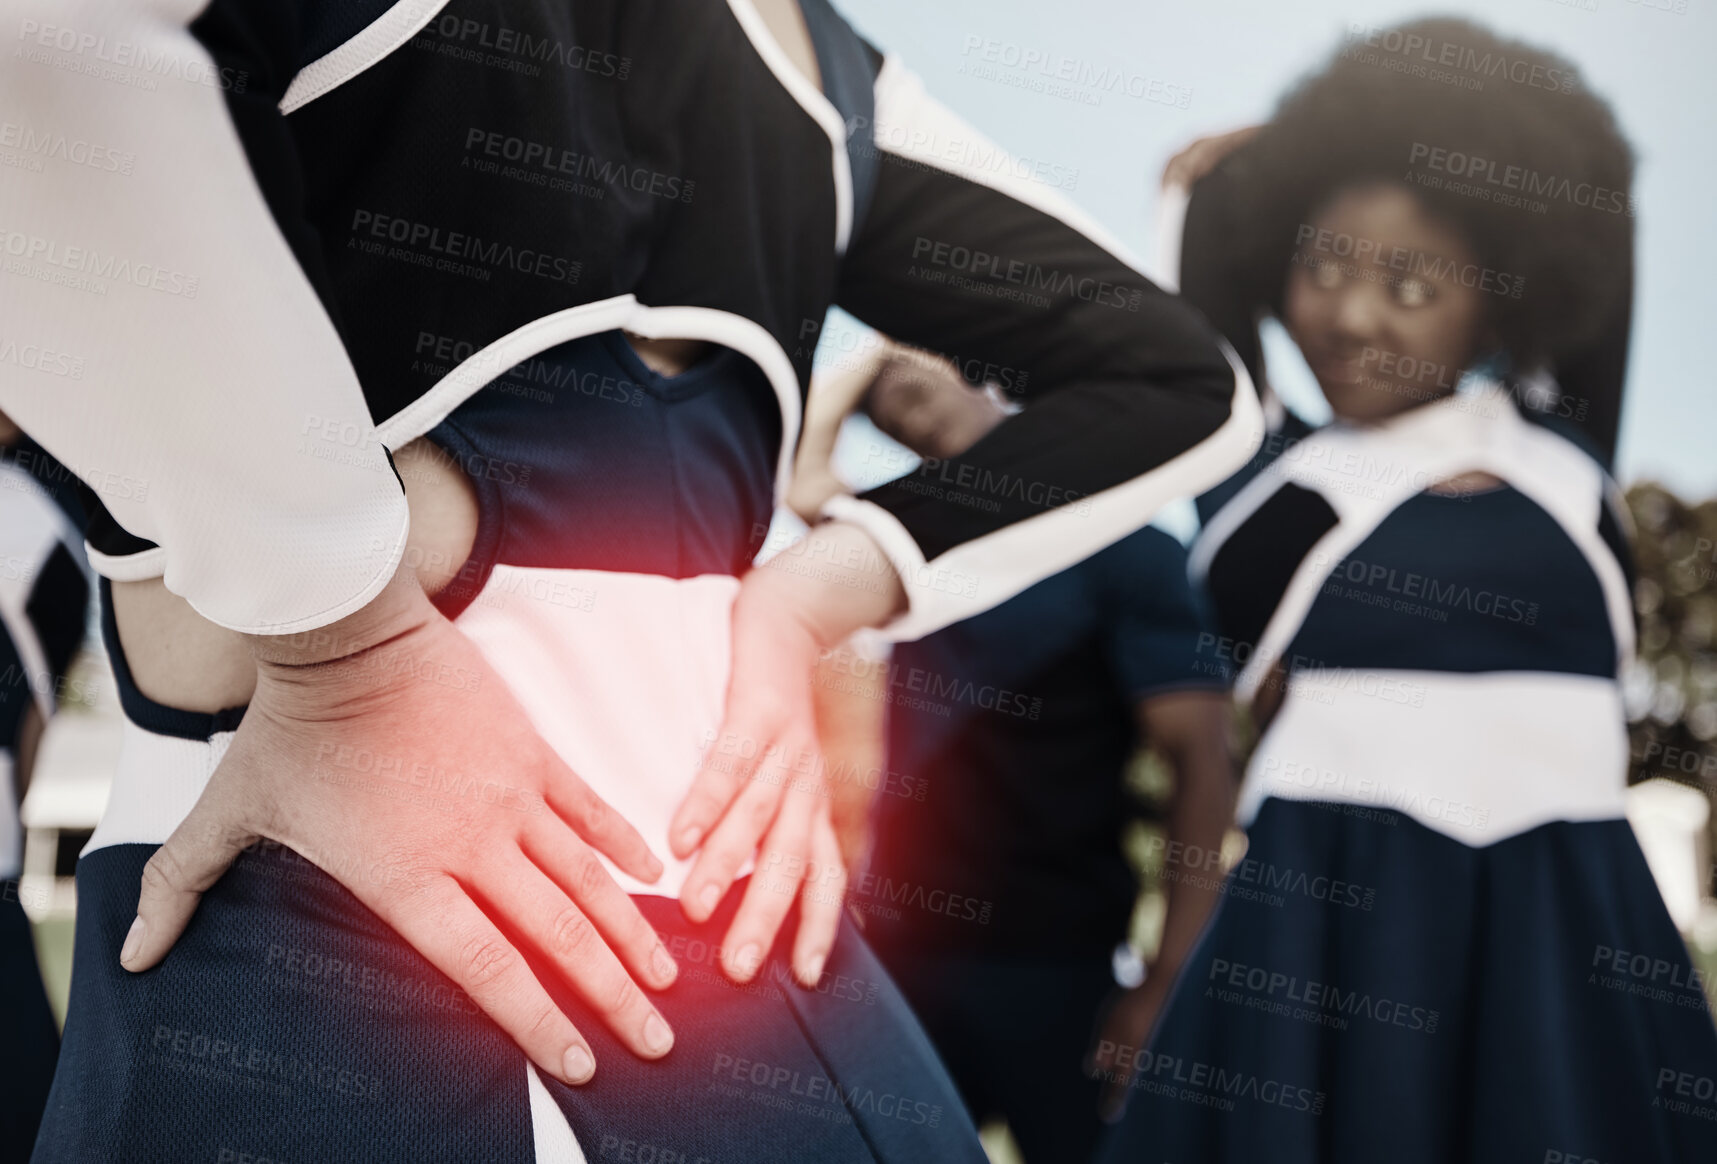 Buy stock photo Cheerleader, sports or woman with back pain, injury or accident on field in game or training match. Red glow, fitness or cheerleading girl athlete with medical emergency, body joint or muscle sprain